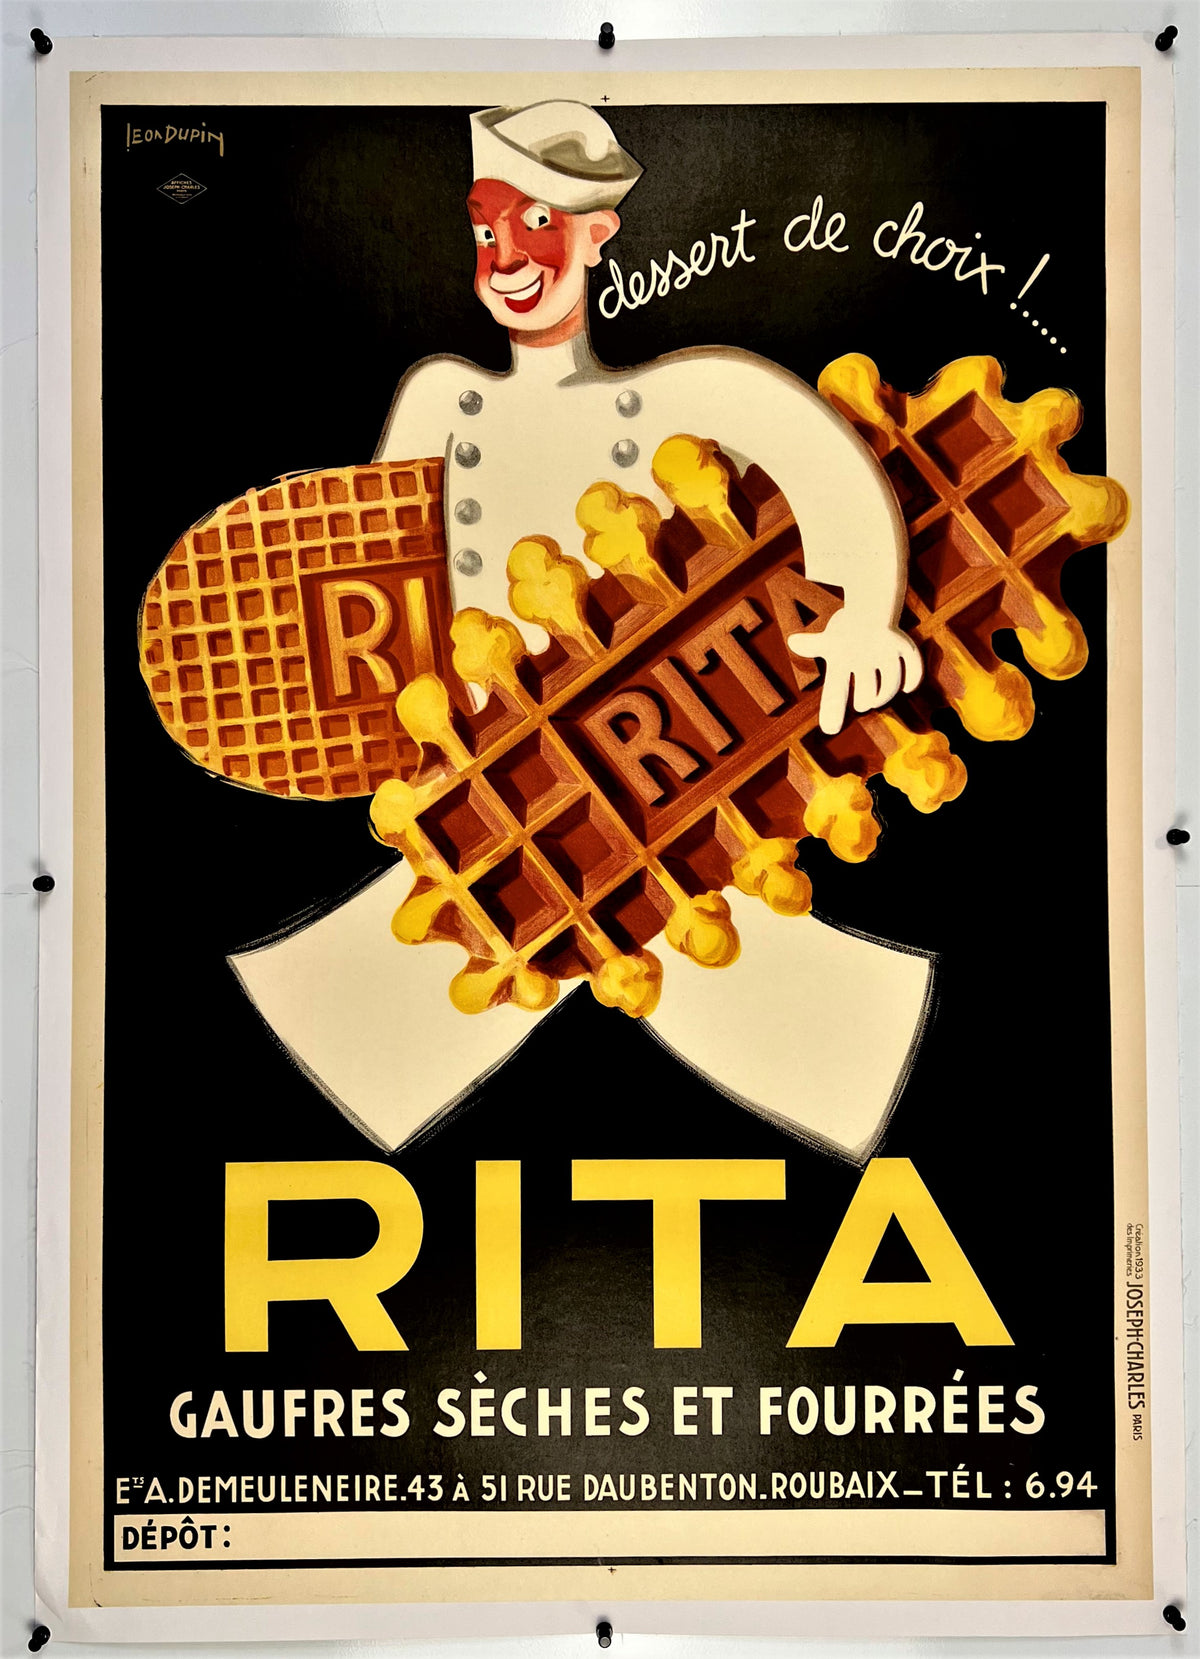 Rita Gaufres by Léon Dupin - Authentic Vintage Poster